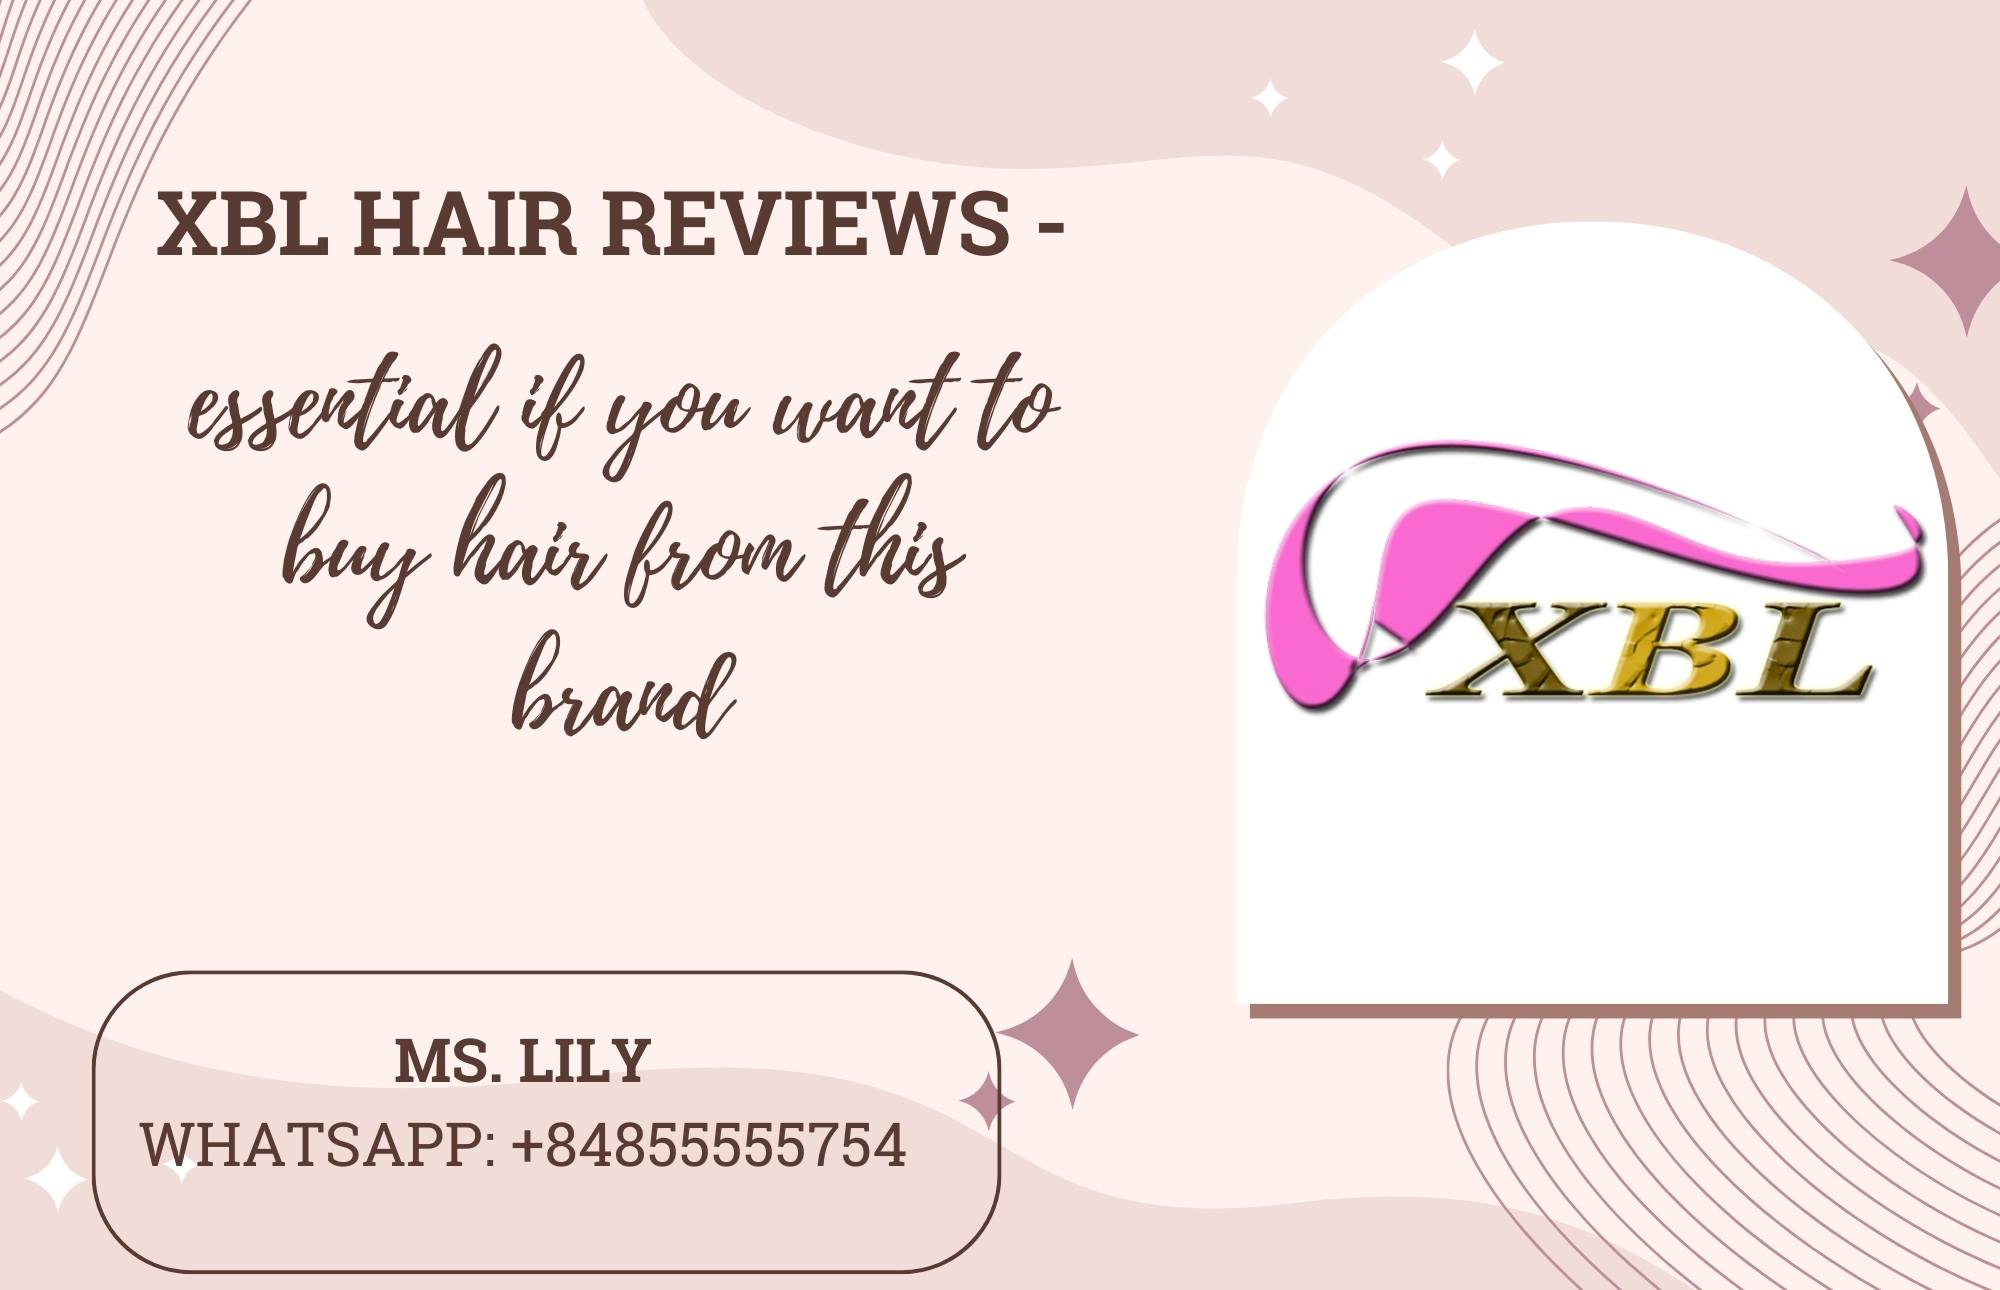 xbl-hair-reviews-essential-if-you-want-to-buy-hair-from-this-brand